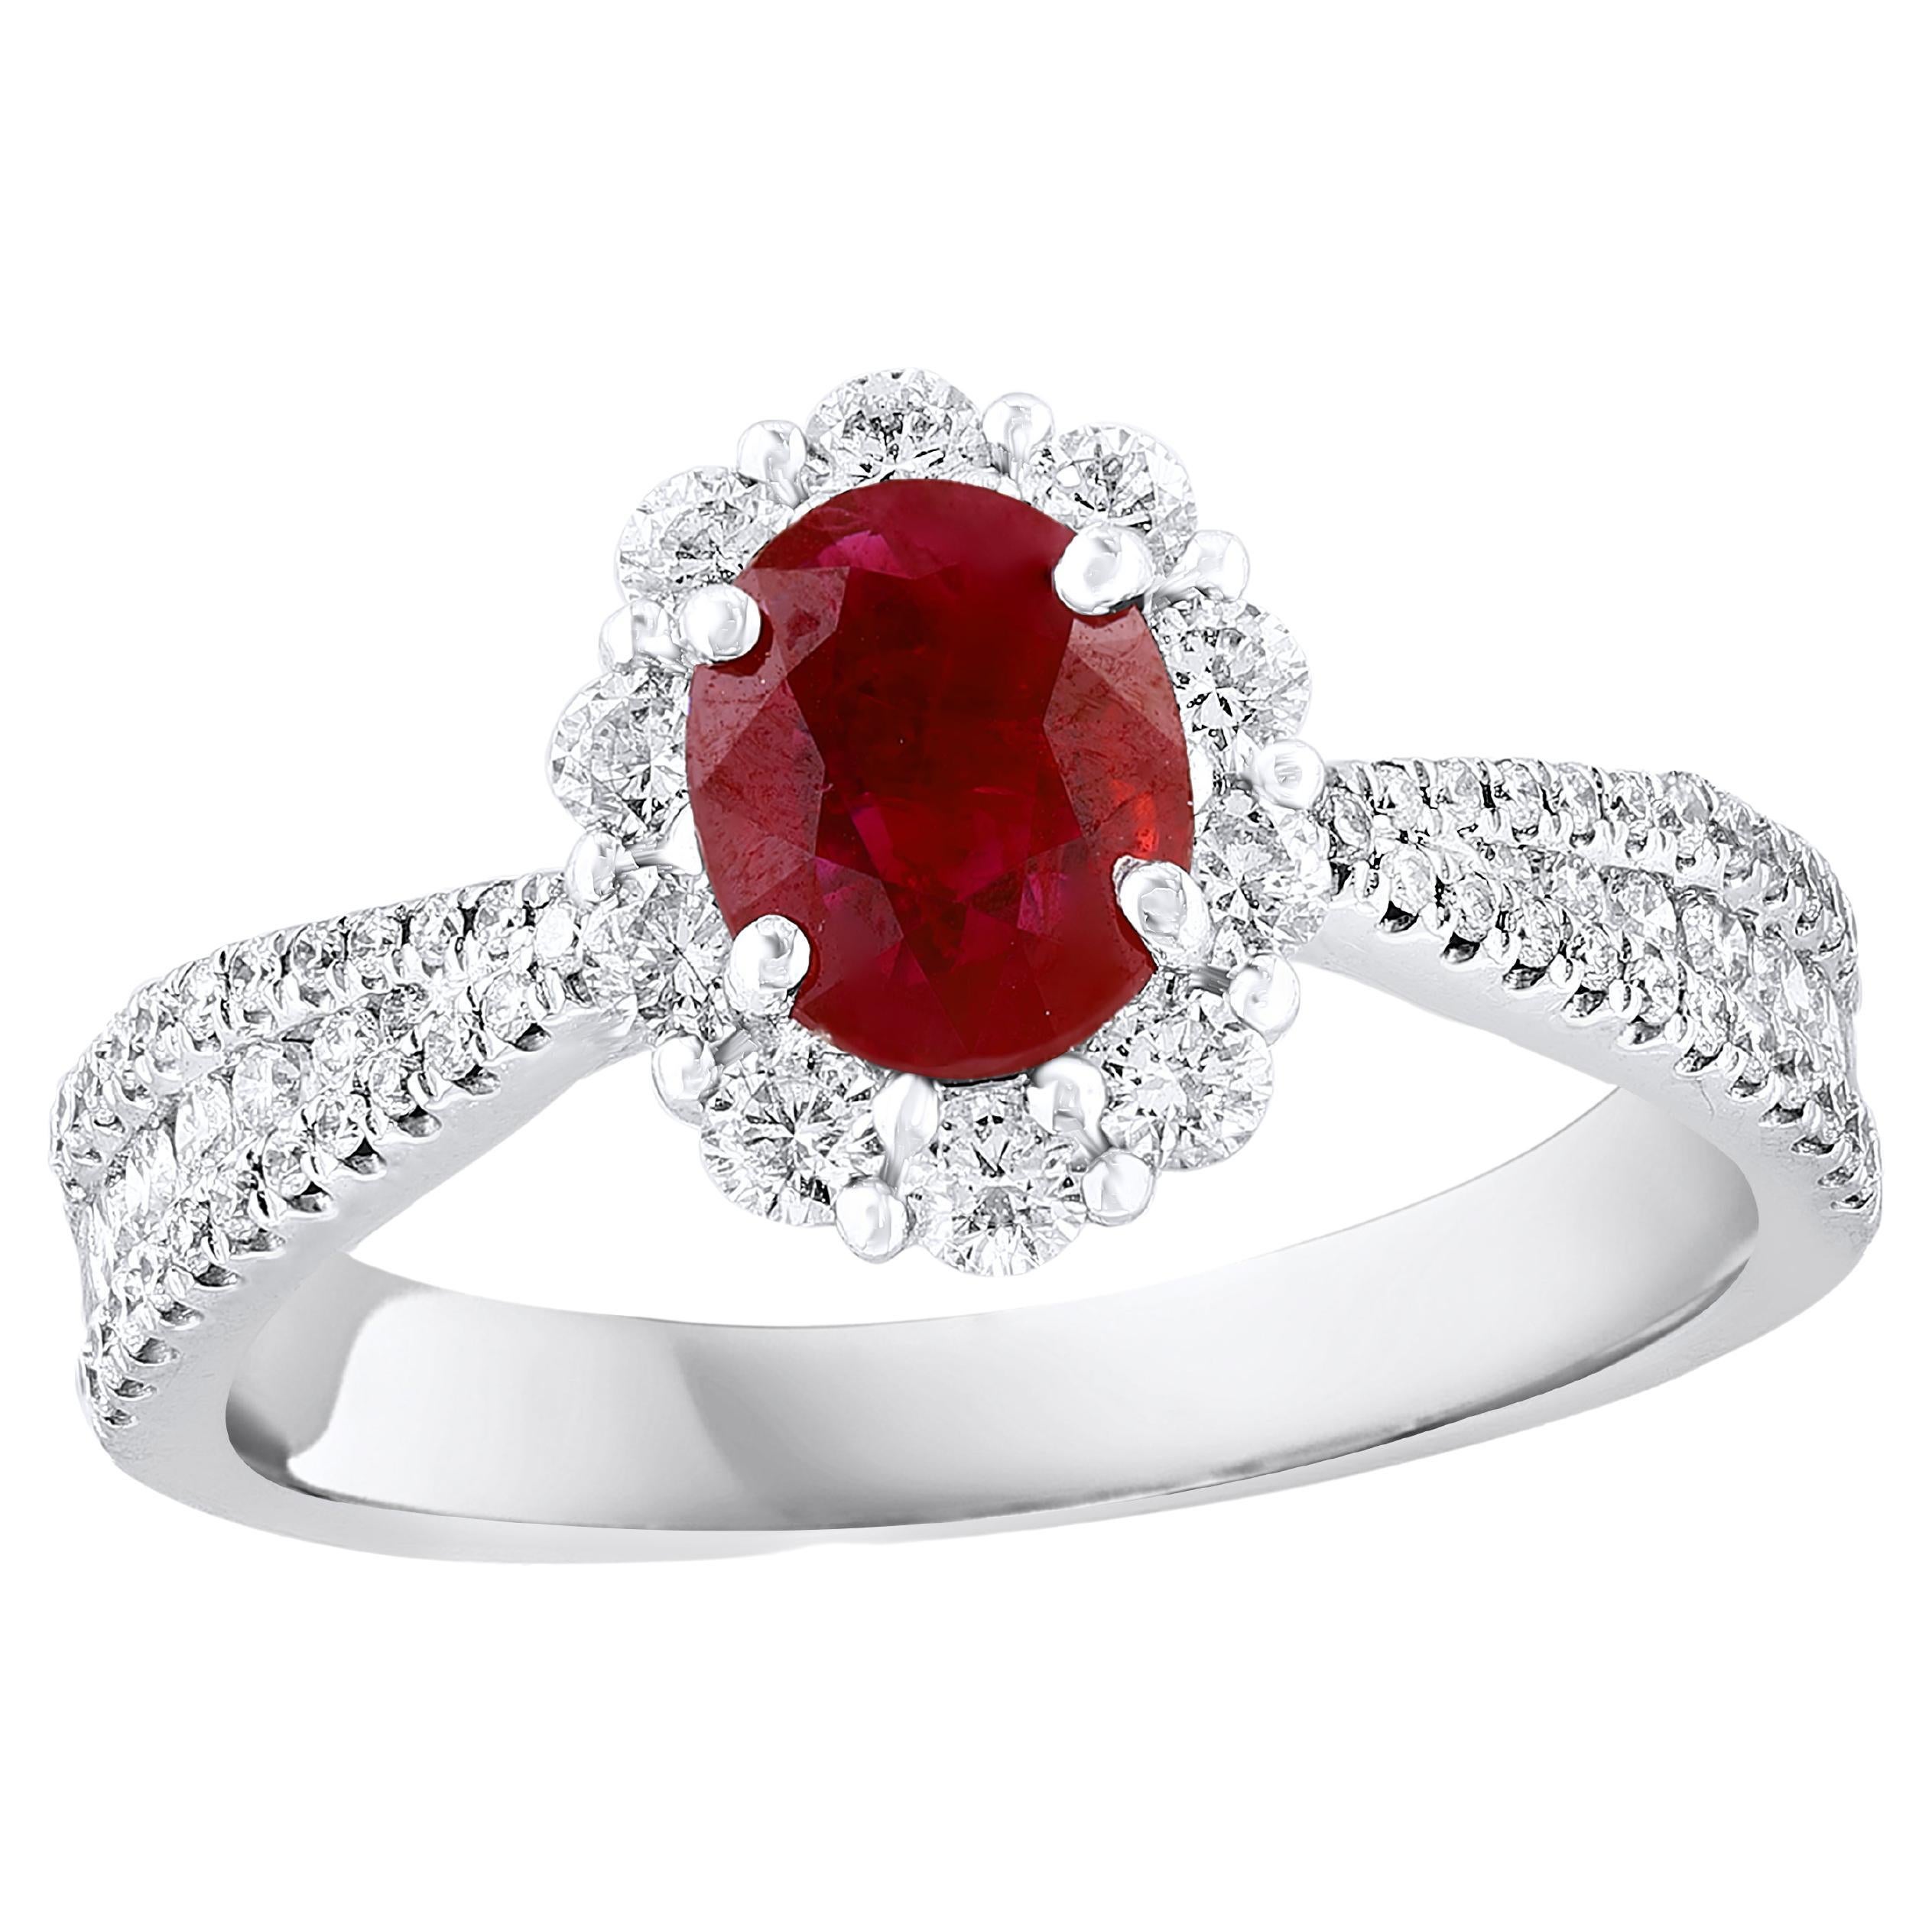 0.80 Carat Oval Cut Ruby and Diamond Engagement Ring in 18K White Gold For Sale